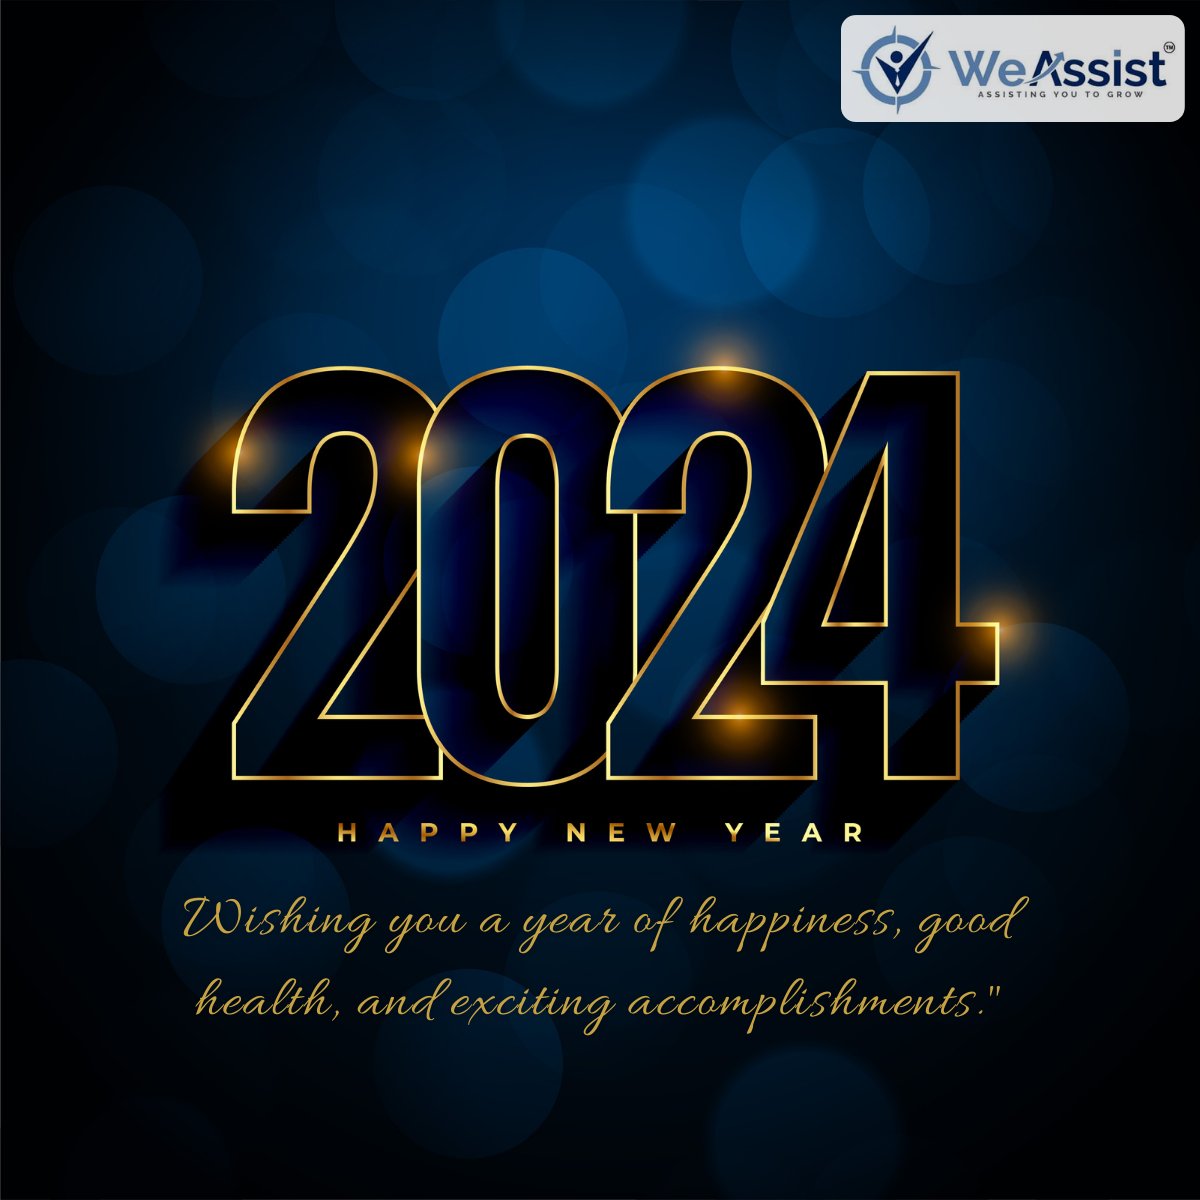 ✨Happy New Year!✨

May the new year bring you joy and success! Wishing you a prosperous New Year filled with happiness and new opportunities.

🌍weassistconsultancy.com

#WeAssist #NewYear2024 #HappyNewYear2024 #ToprecRuitmentServices #HumanResourceConsulting #Recruiter